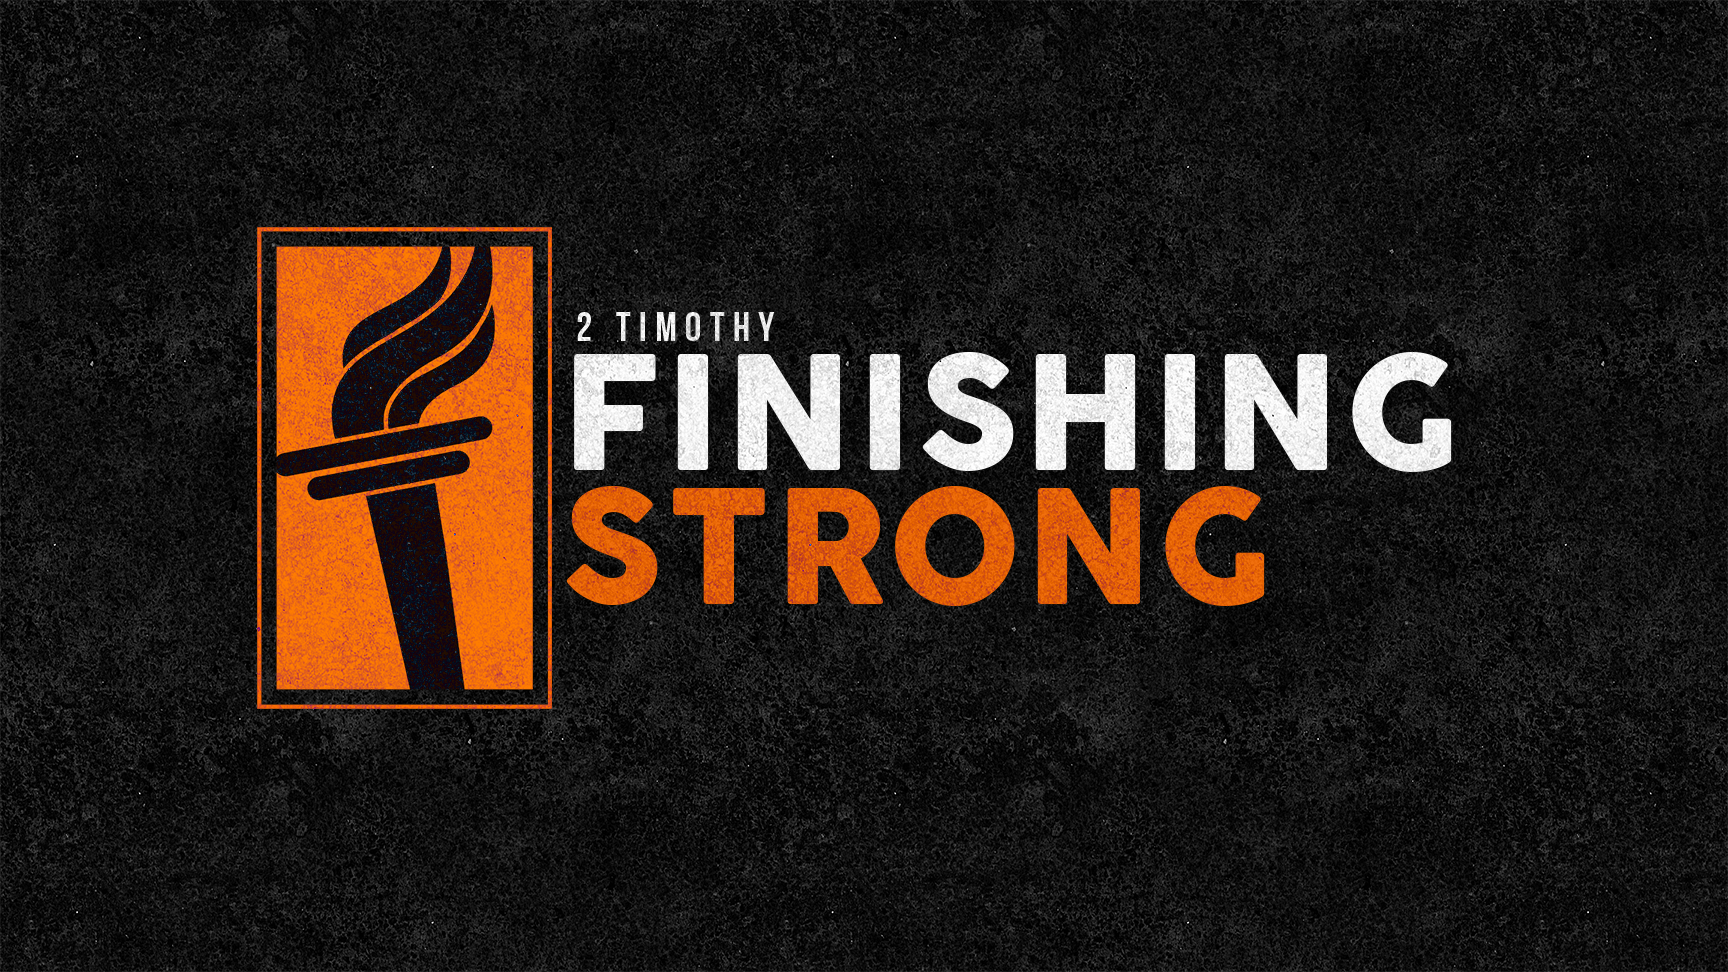 Featured image for “Finishing Strong”